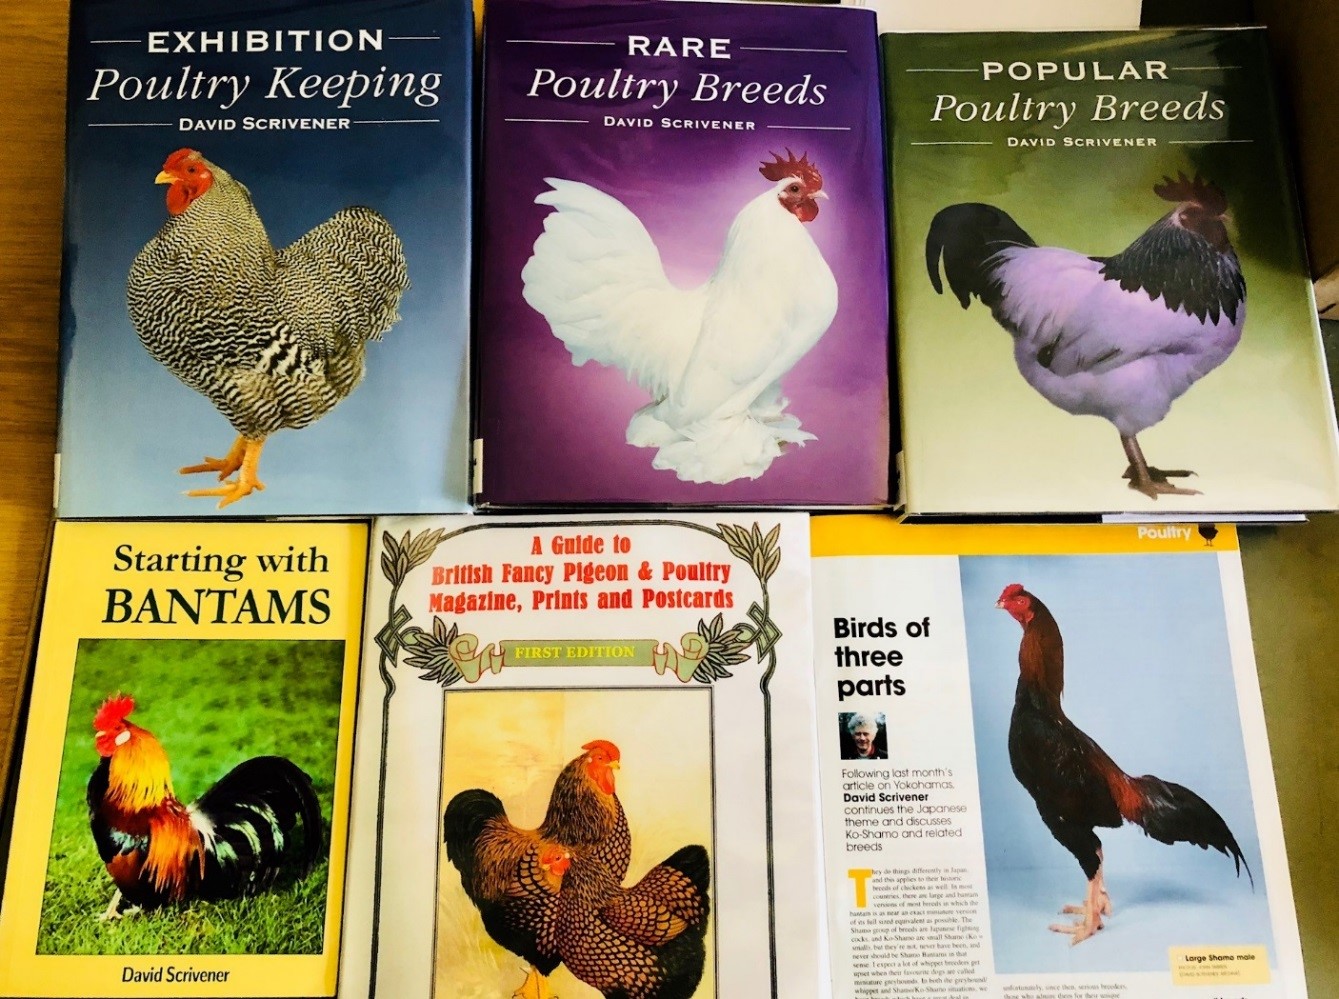 Image of books about poultry by David Scrivener